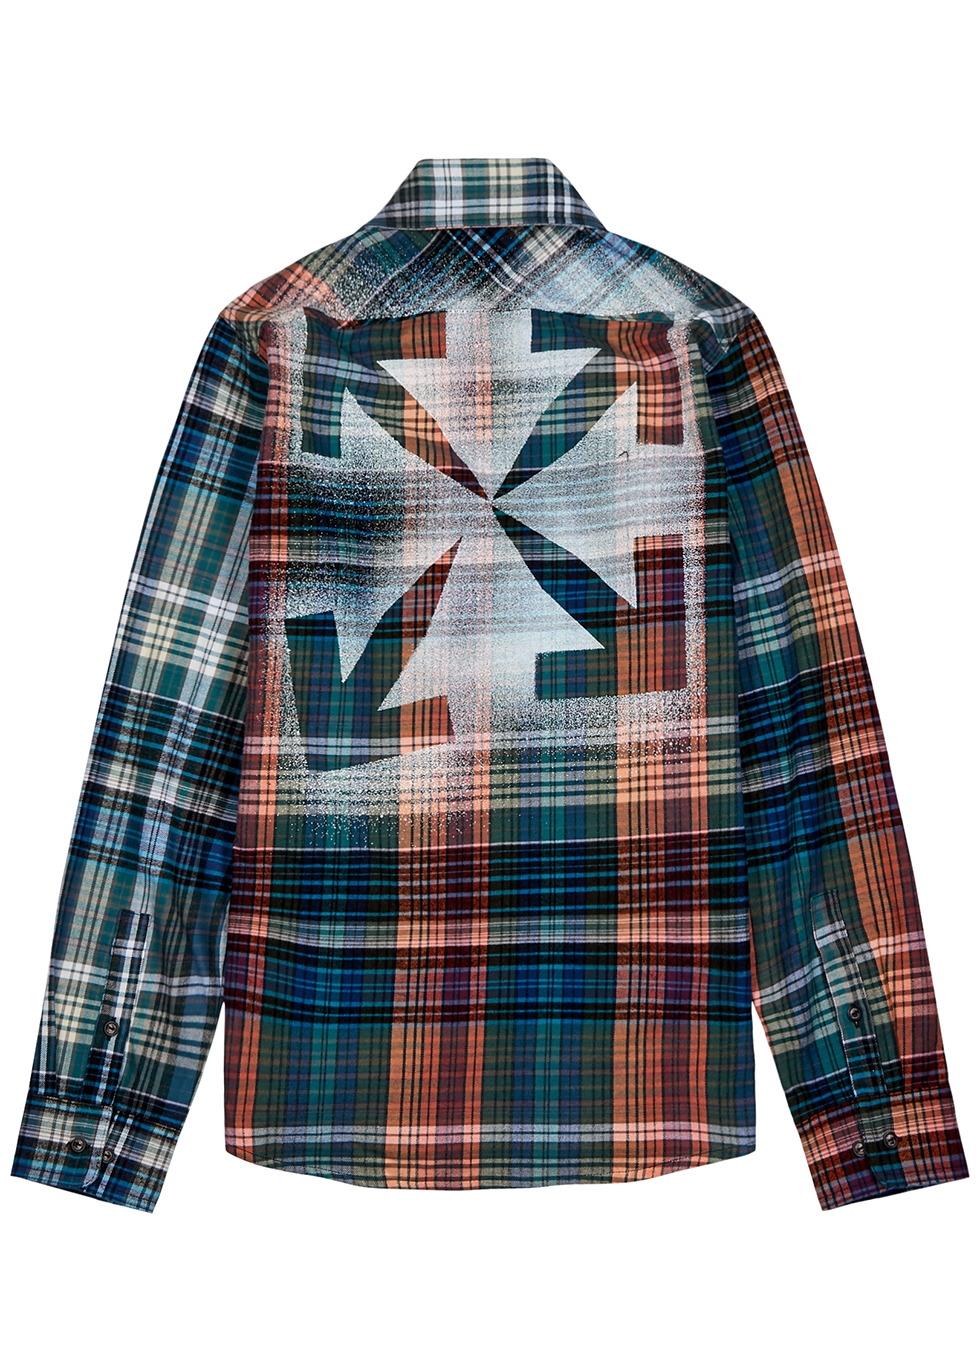 off white trainers flannels